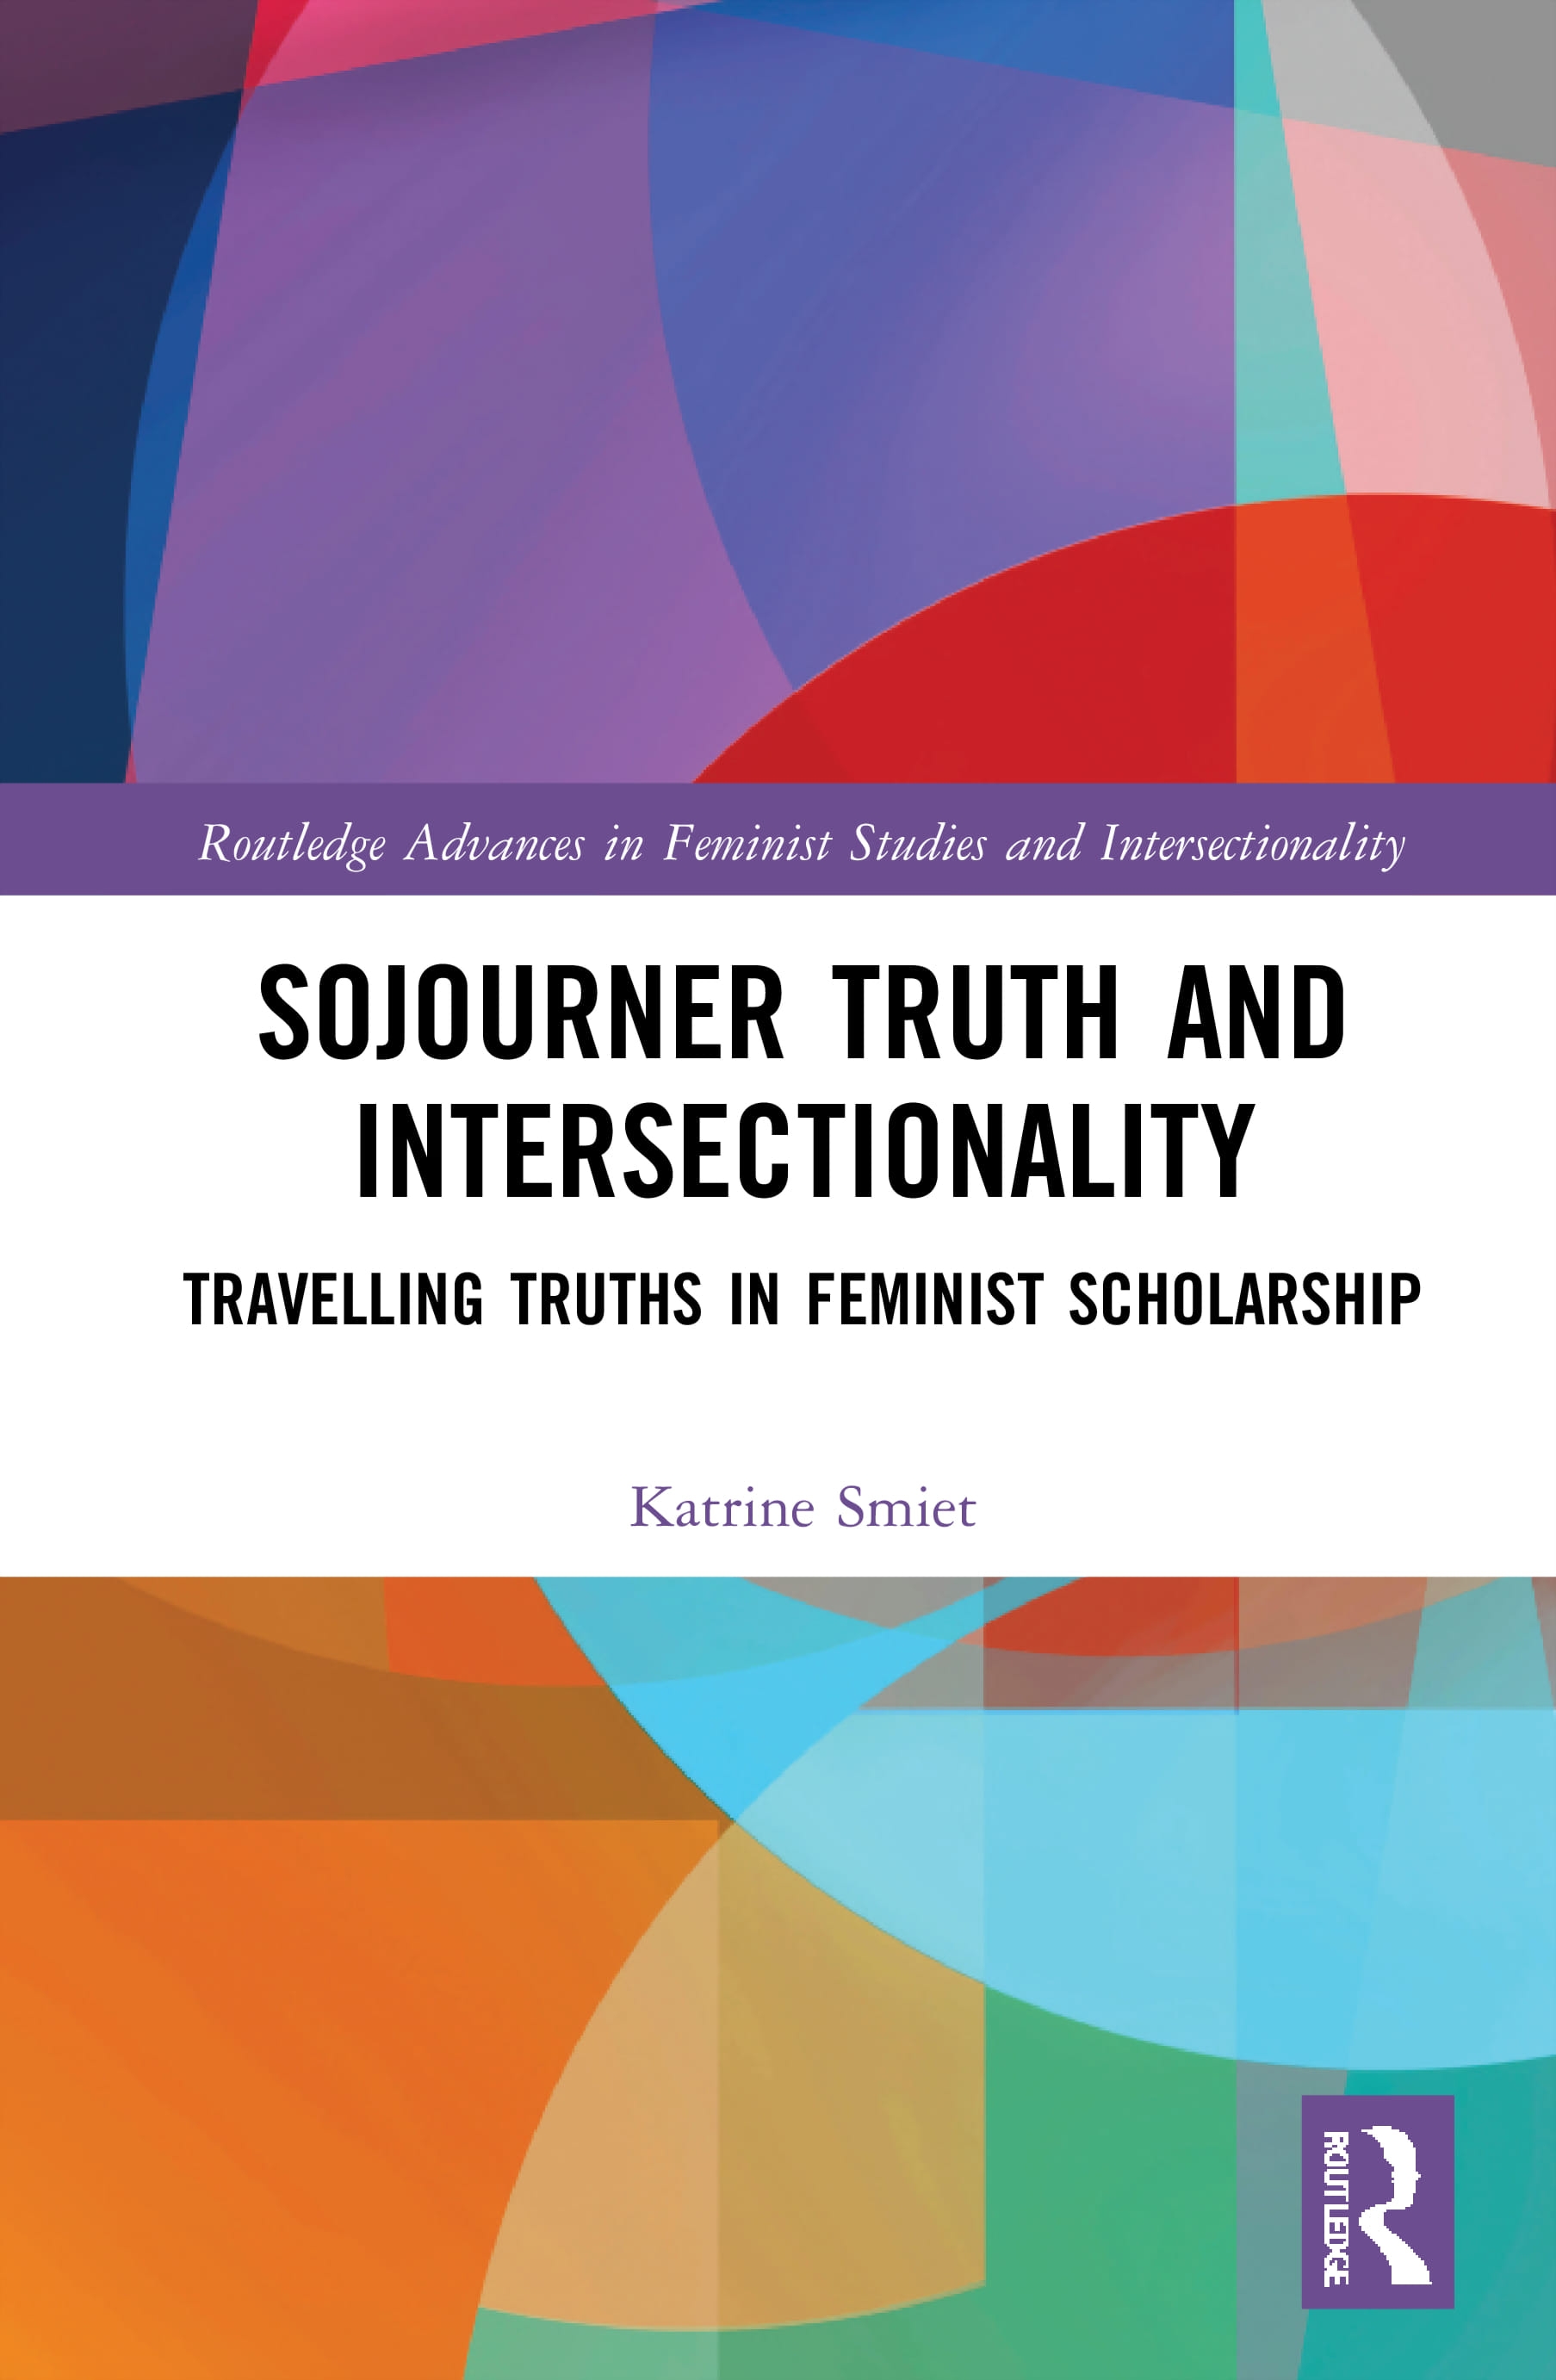 Sojourner Truth and Intersectionality: Travelling Truths in Feminist Scholarship